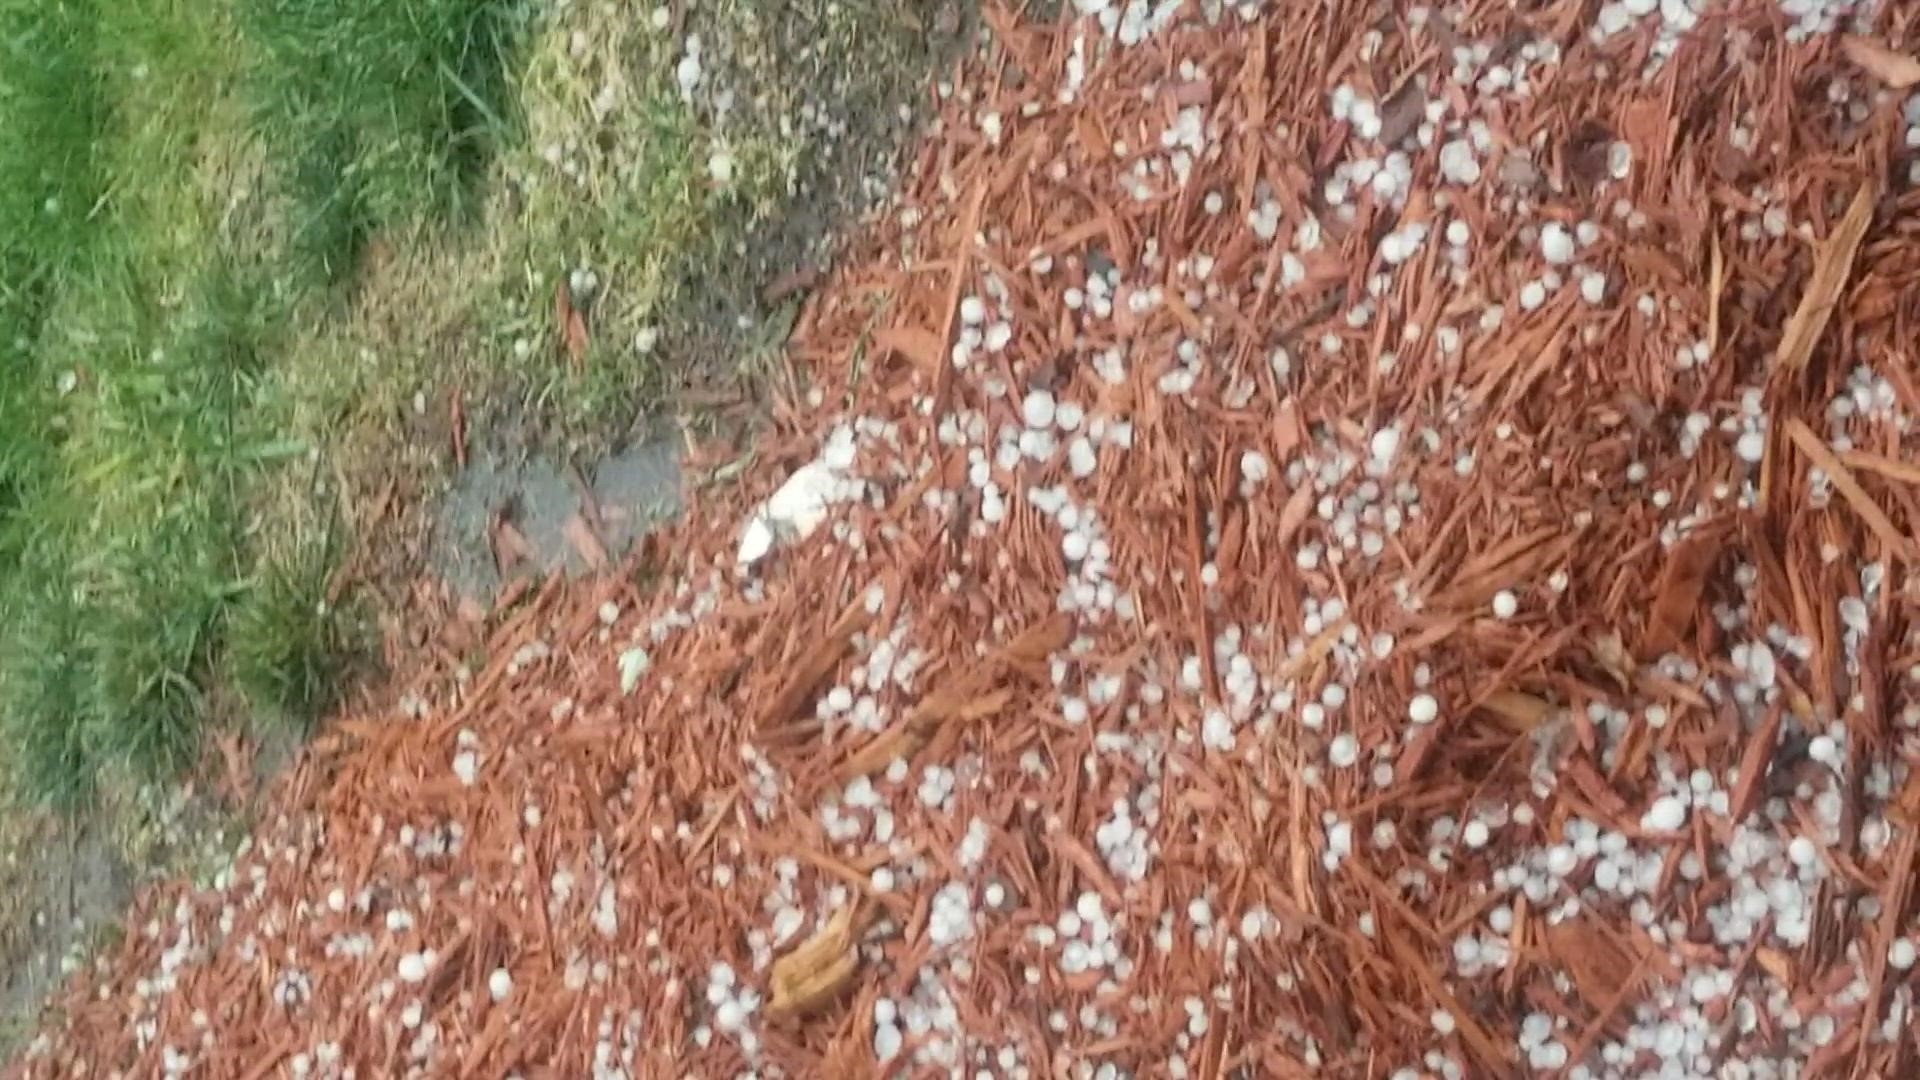 Rhyan Jordan provided the following video of hail from Rock Hill.